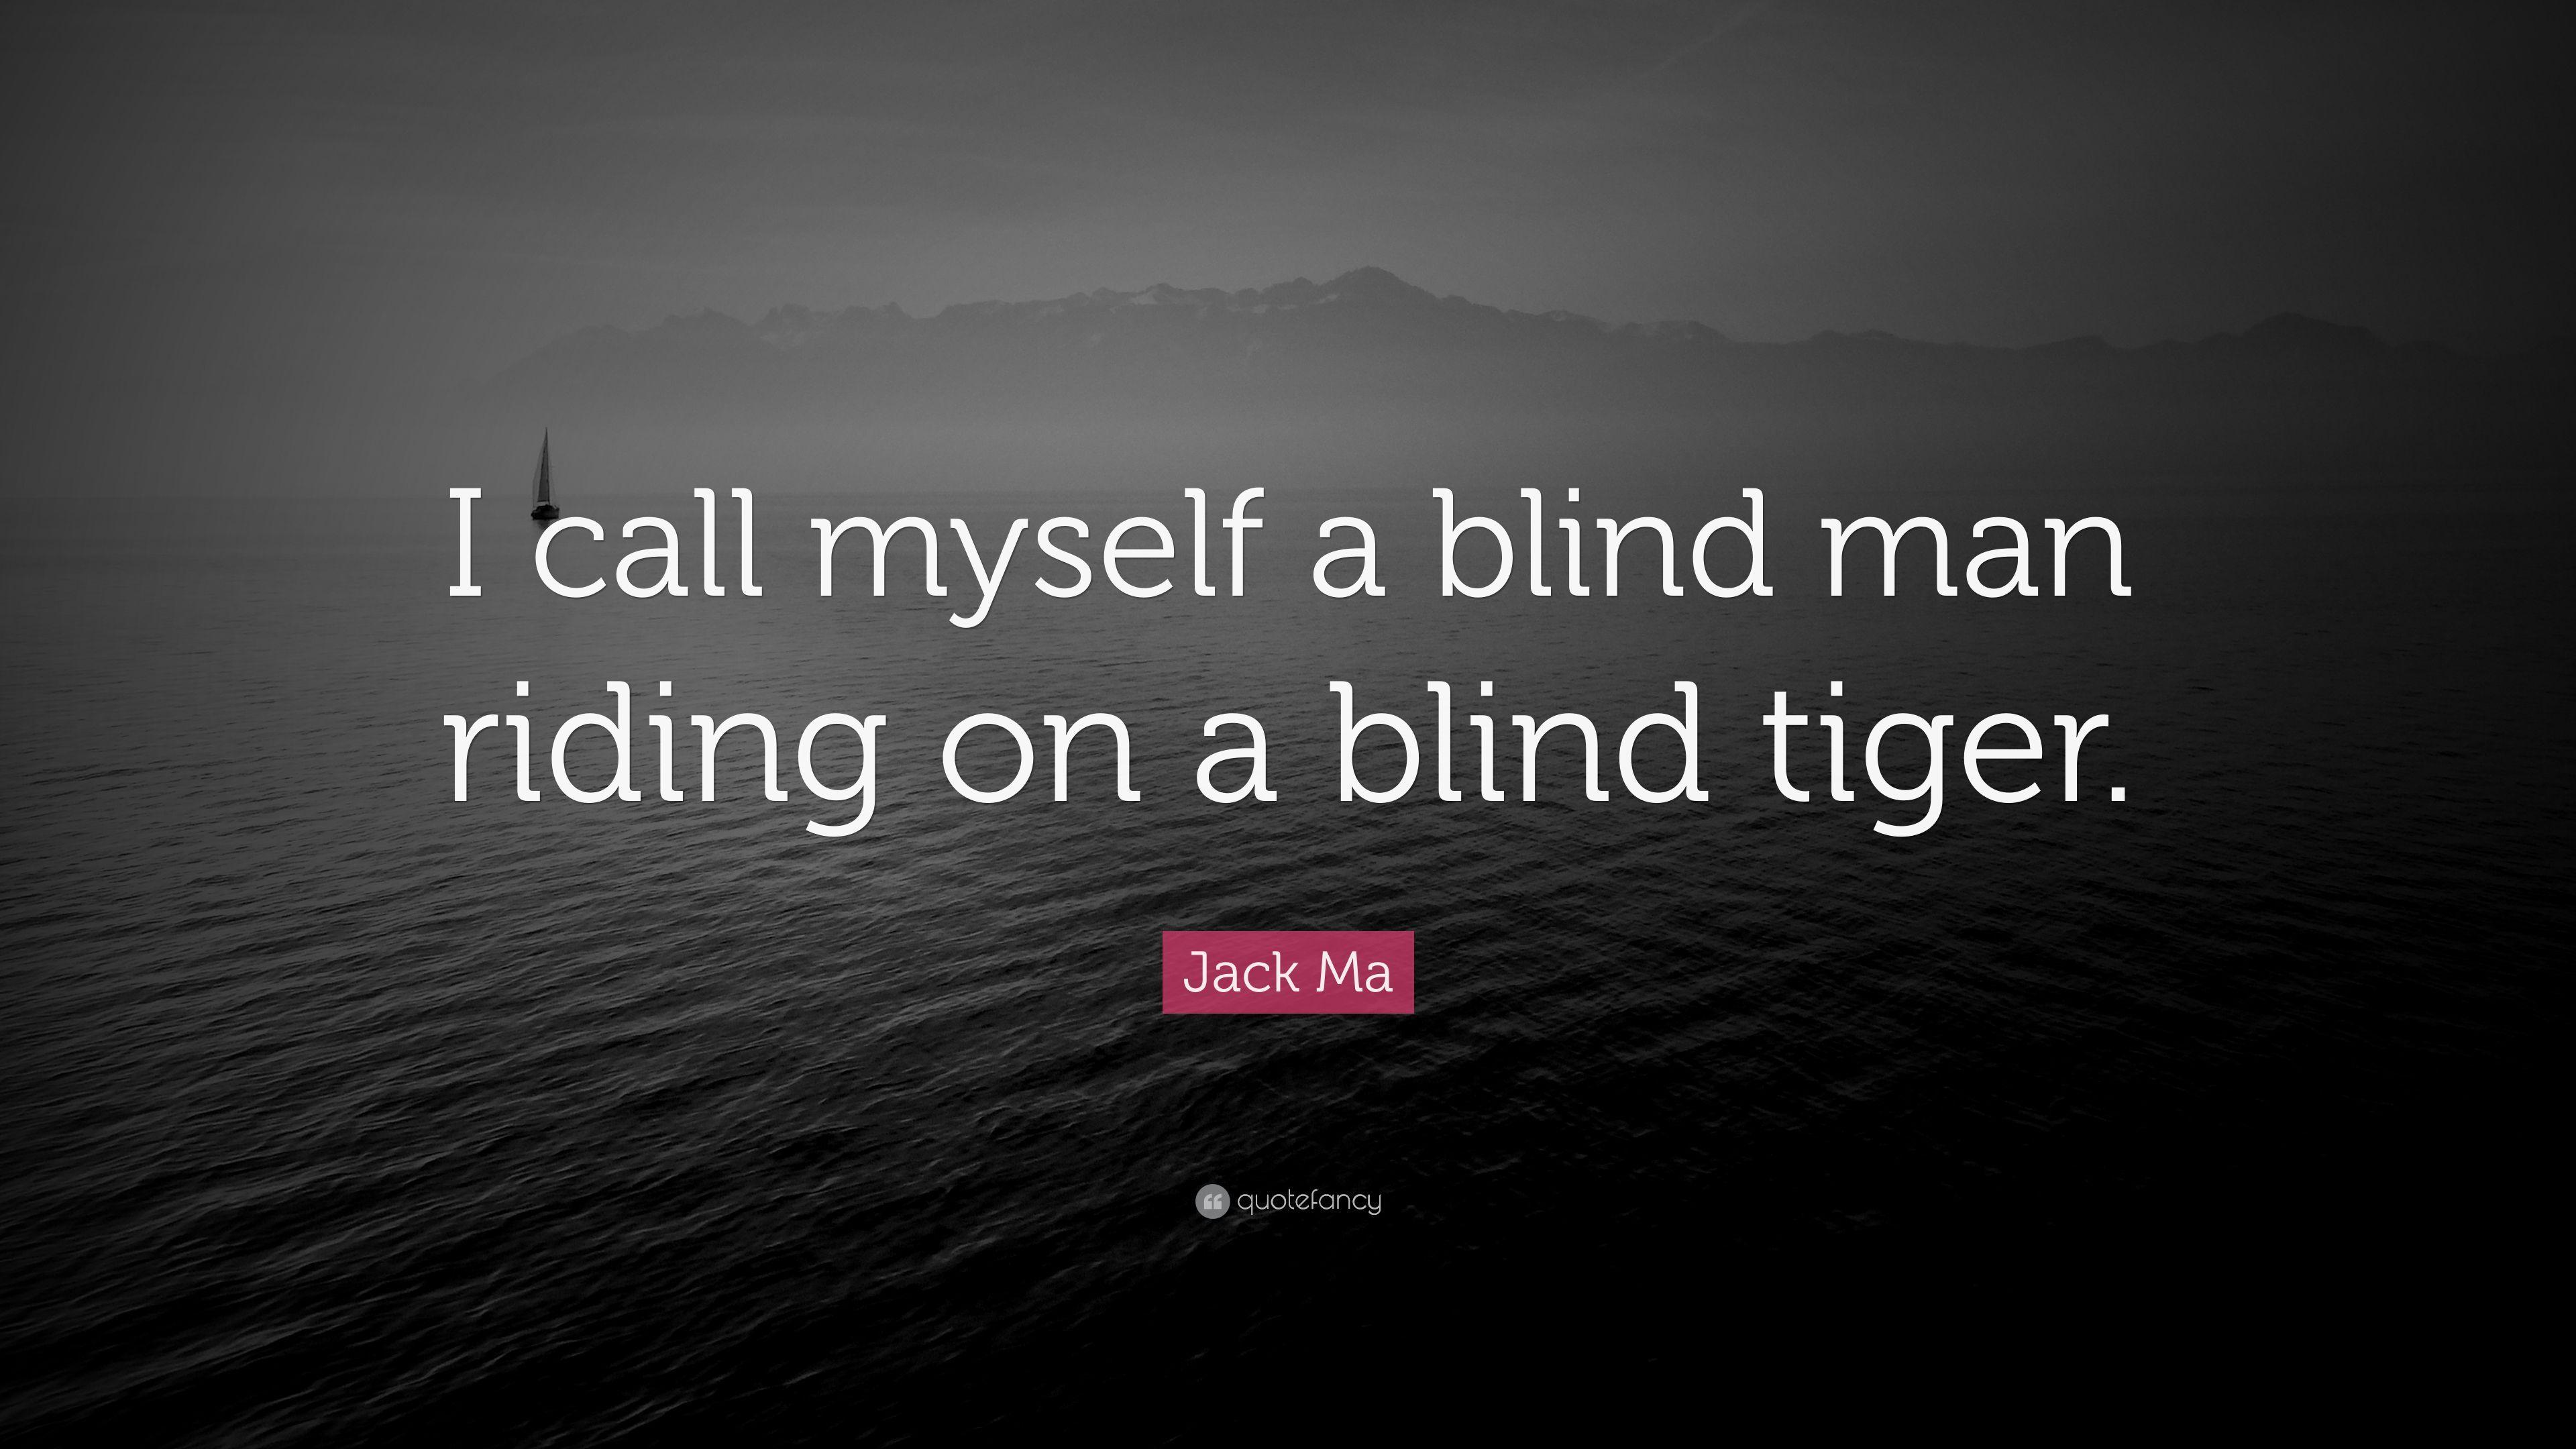 Jack Ma Quote: “I call myself a blind man riding on a blind tiger